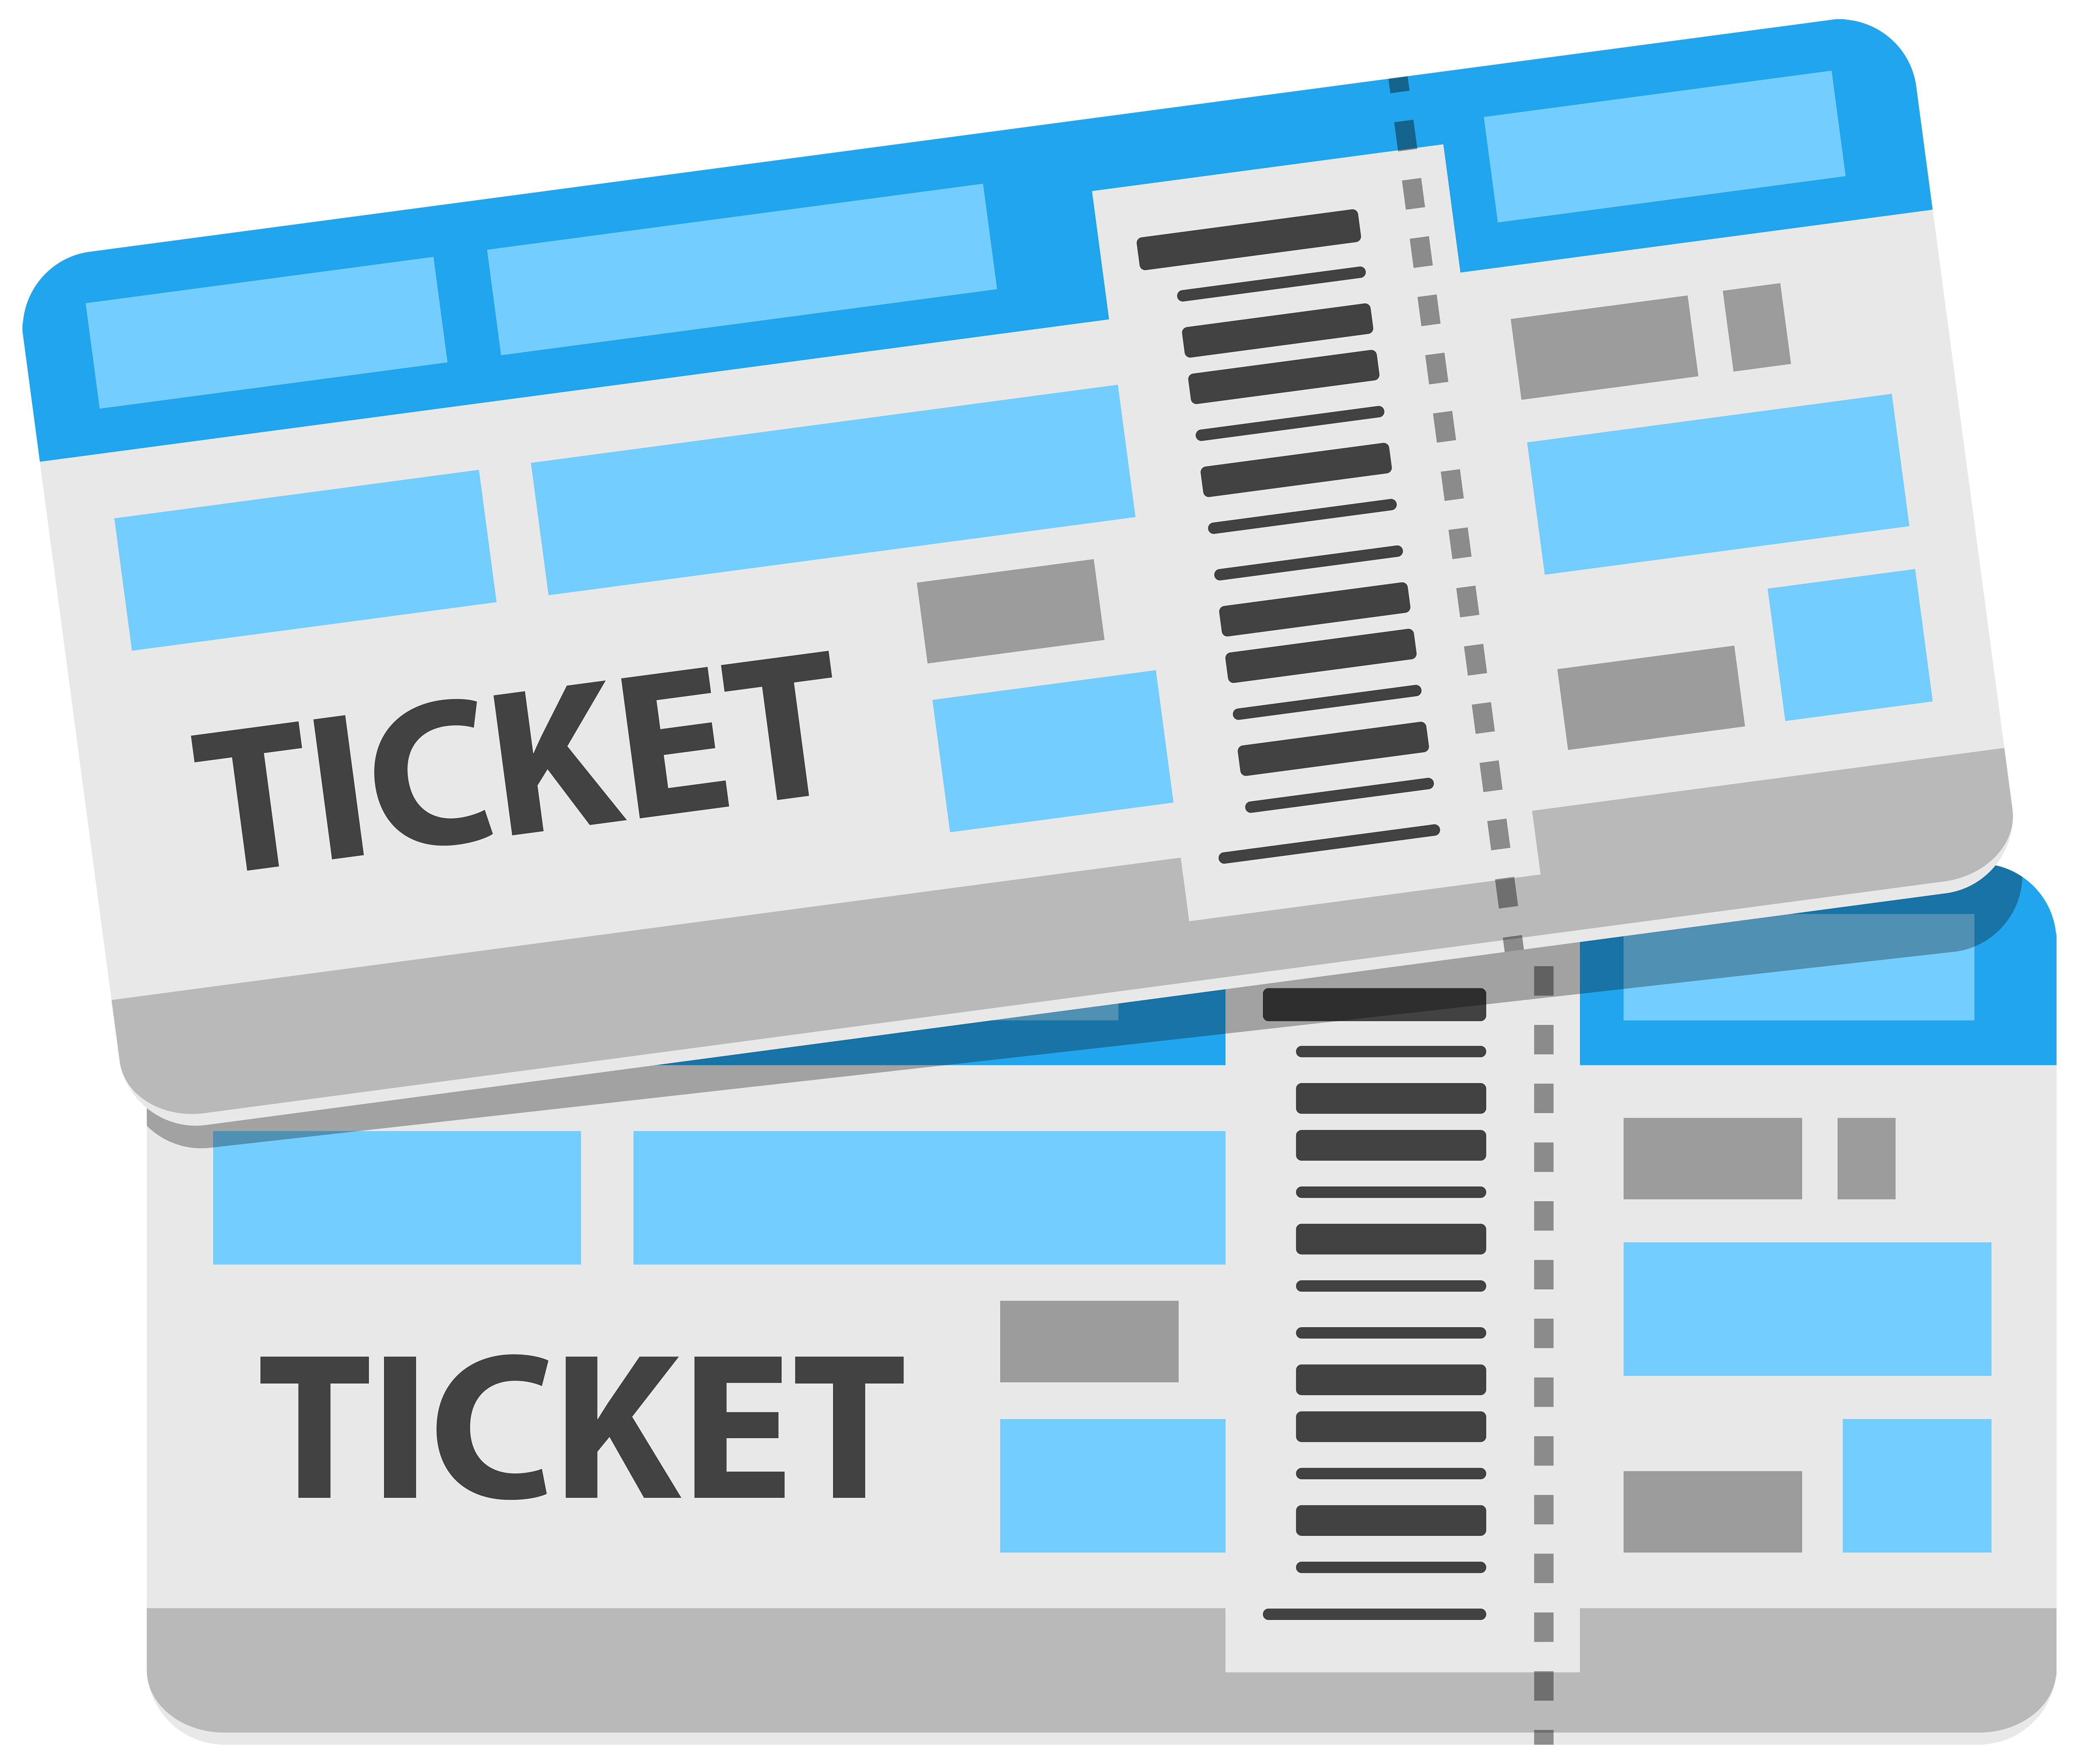 Tickets png image gallery. Raffle clipart plane ticket